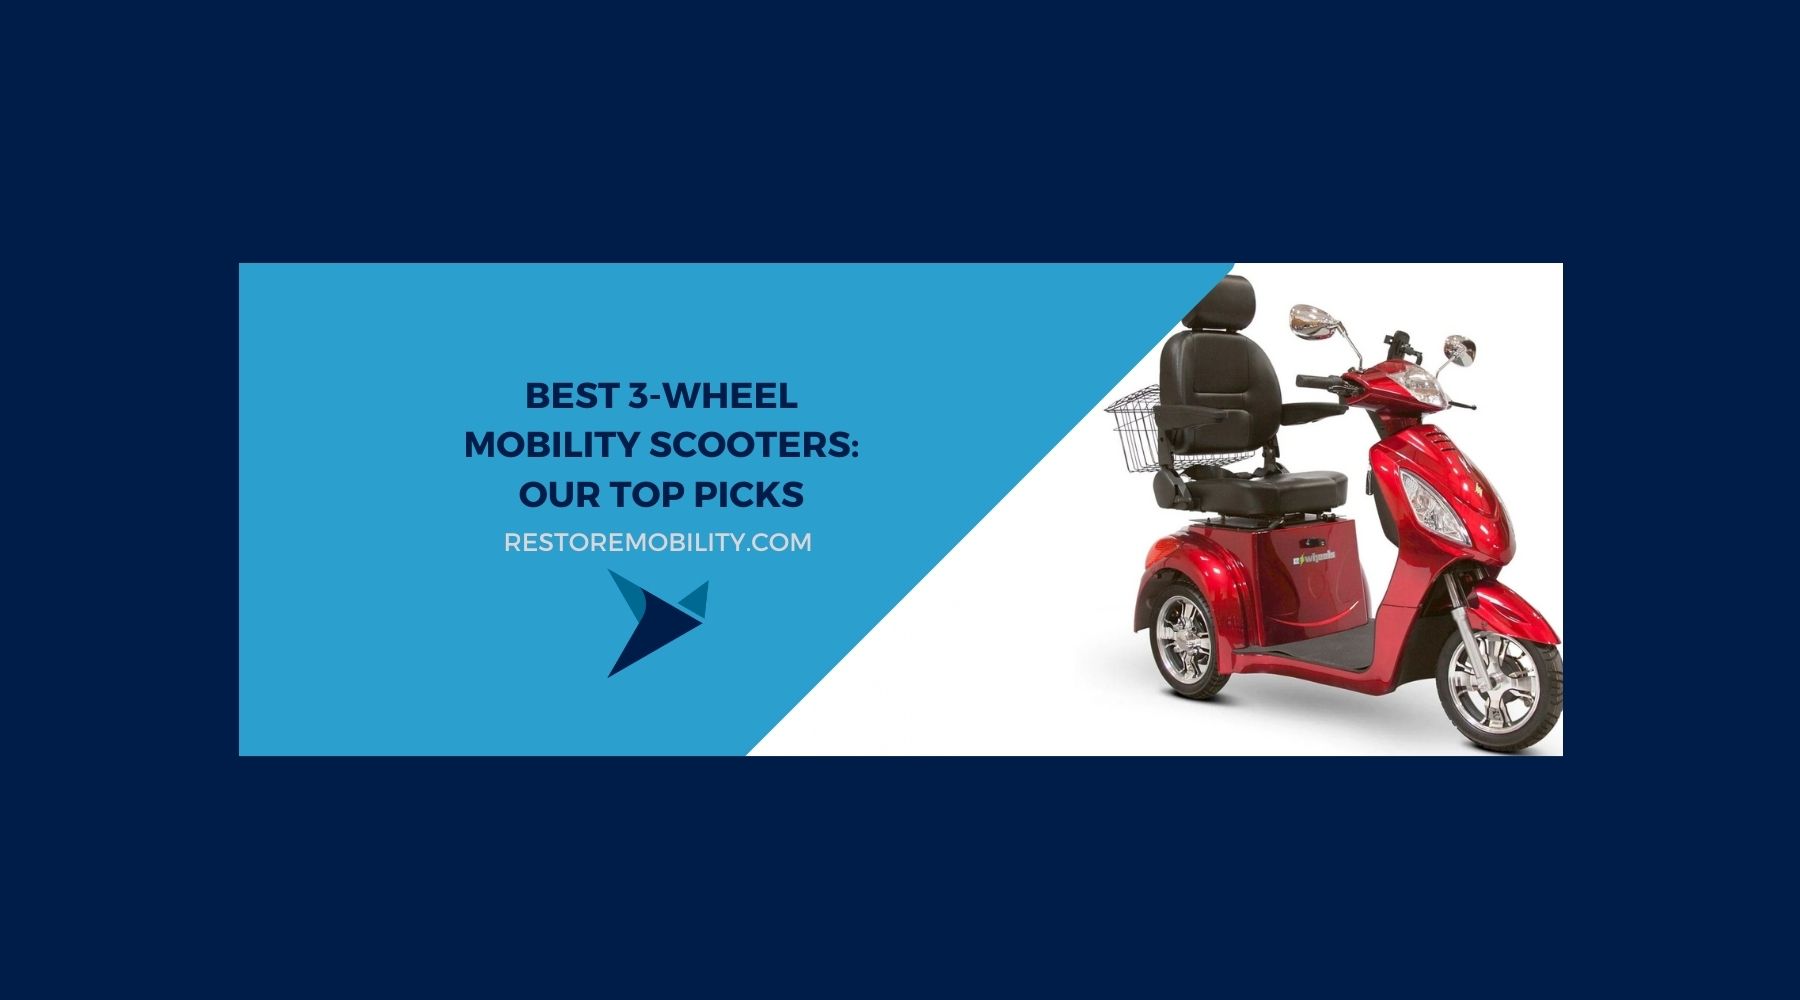 Best 3 Wheel Mobility Scooters: Our Top Picks